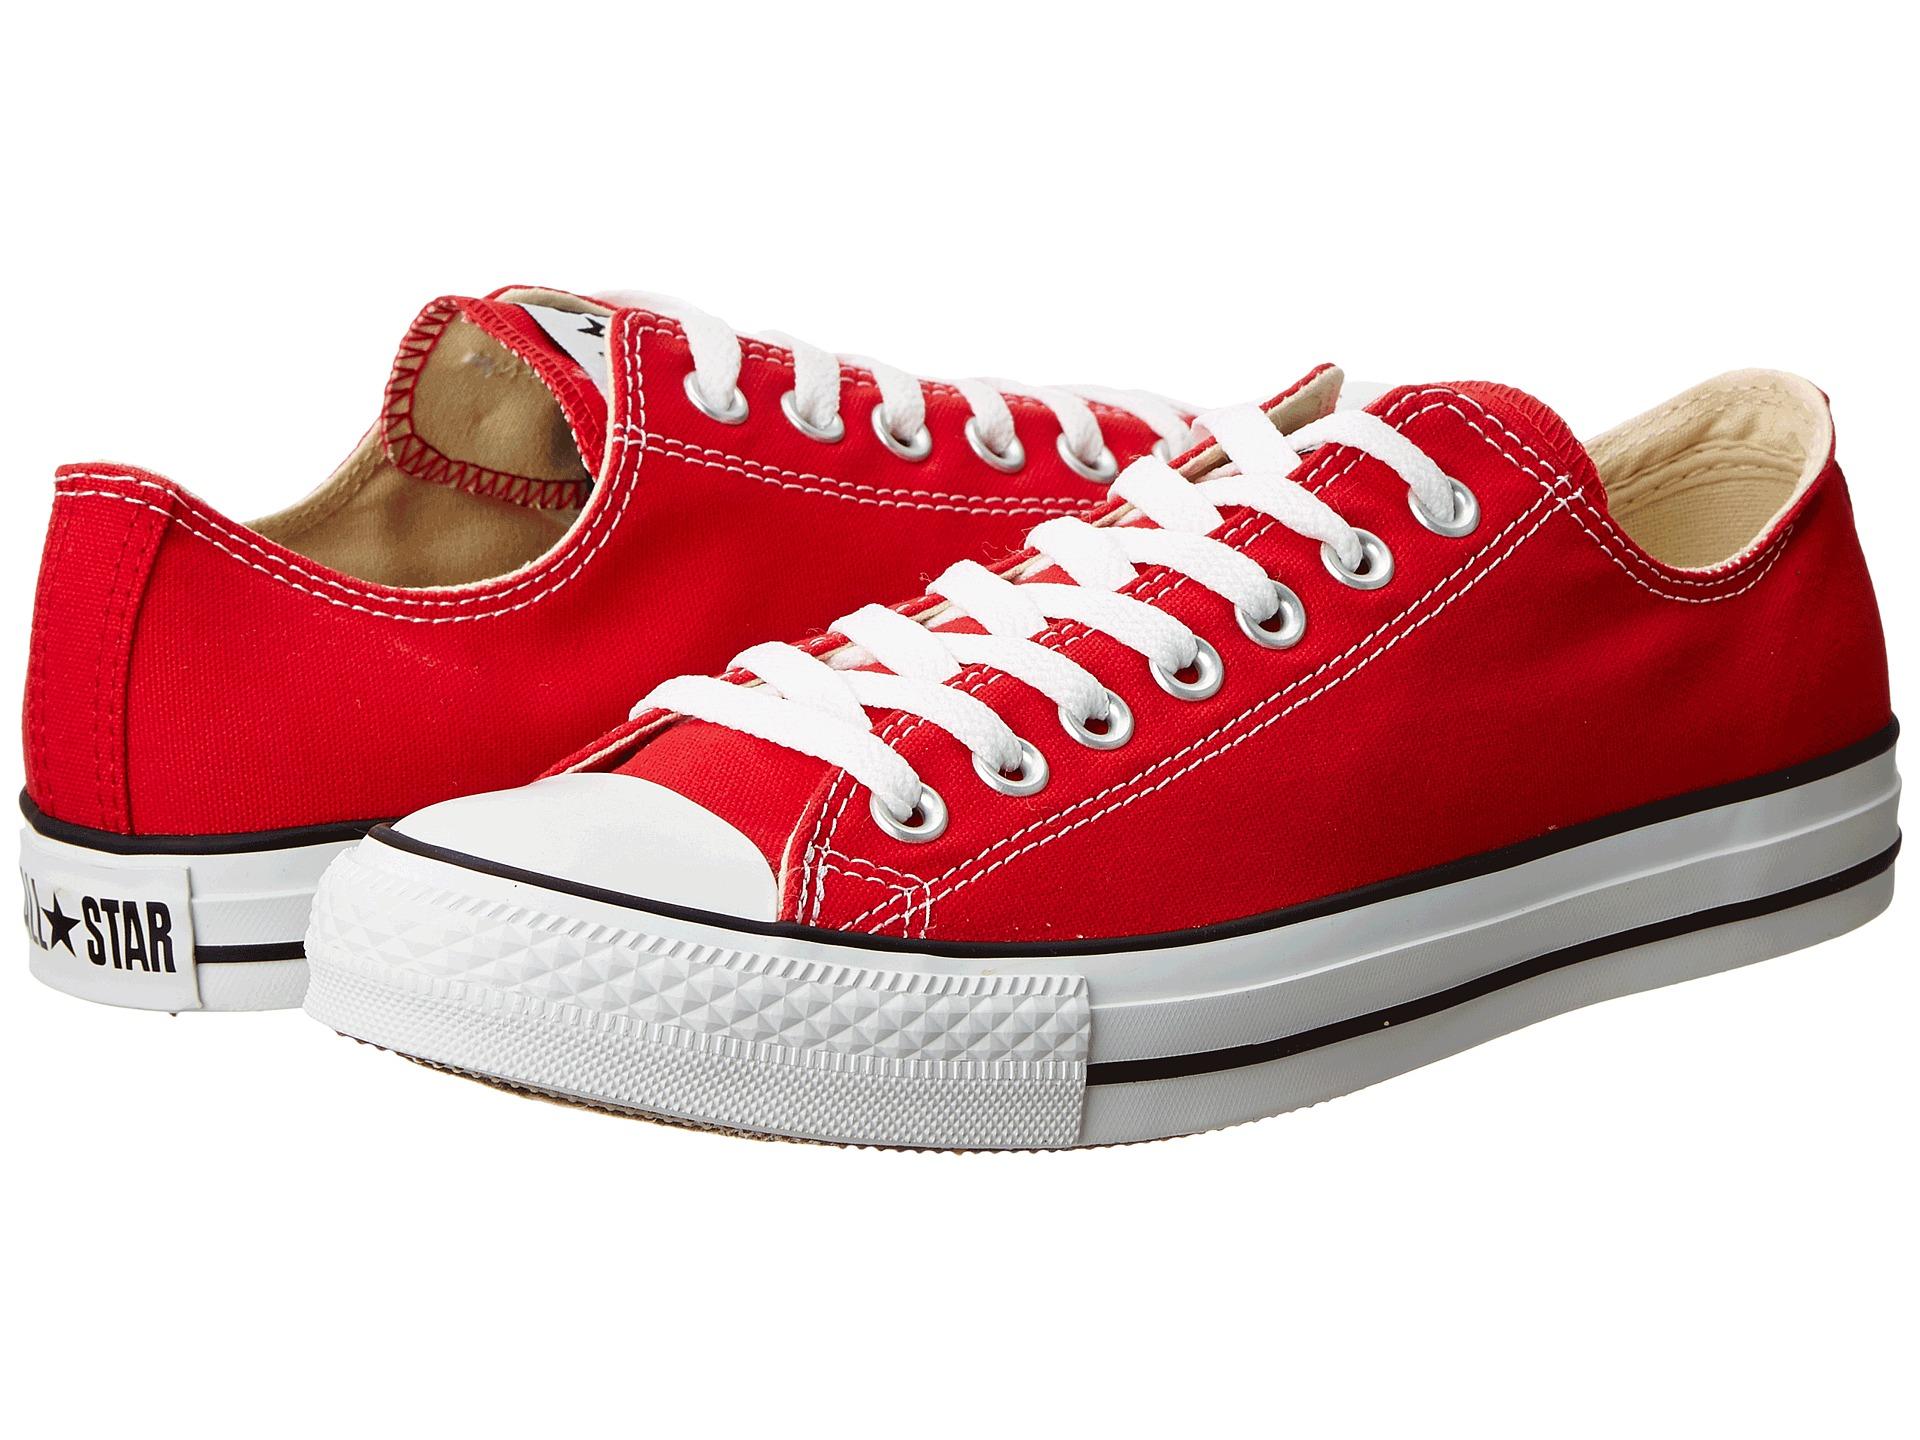 converse-chuck-taylor-all-star-sneakers-in-red-save-27-lyst